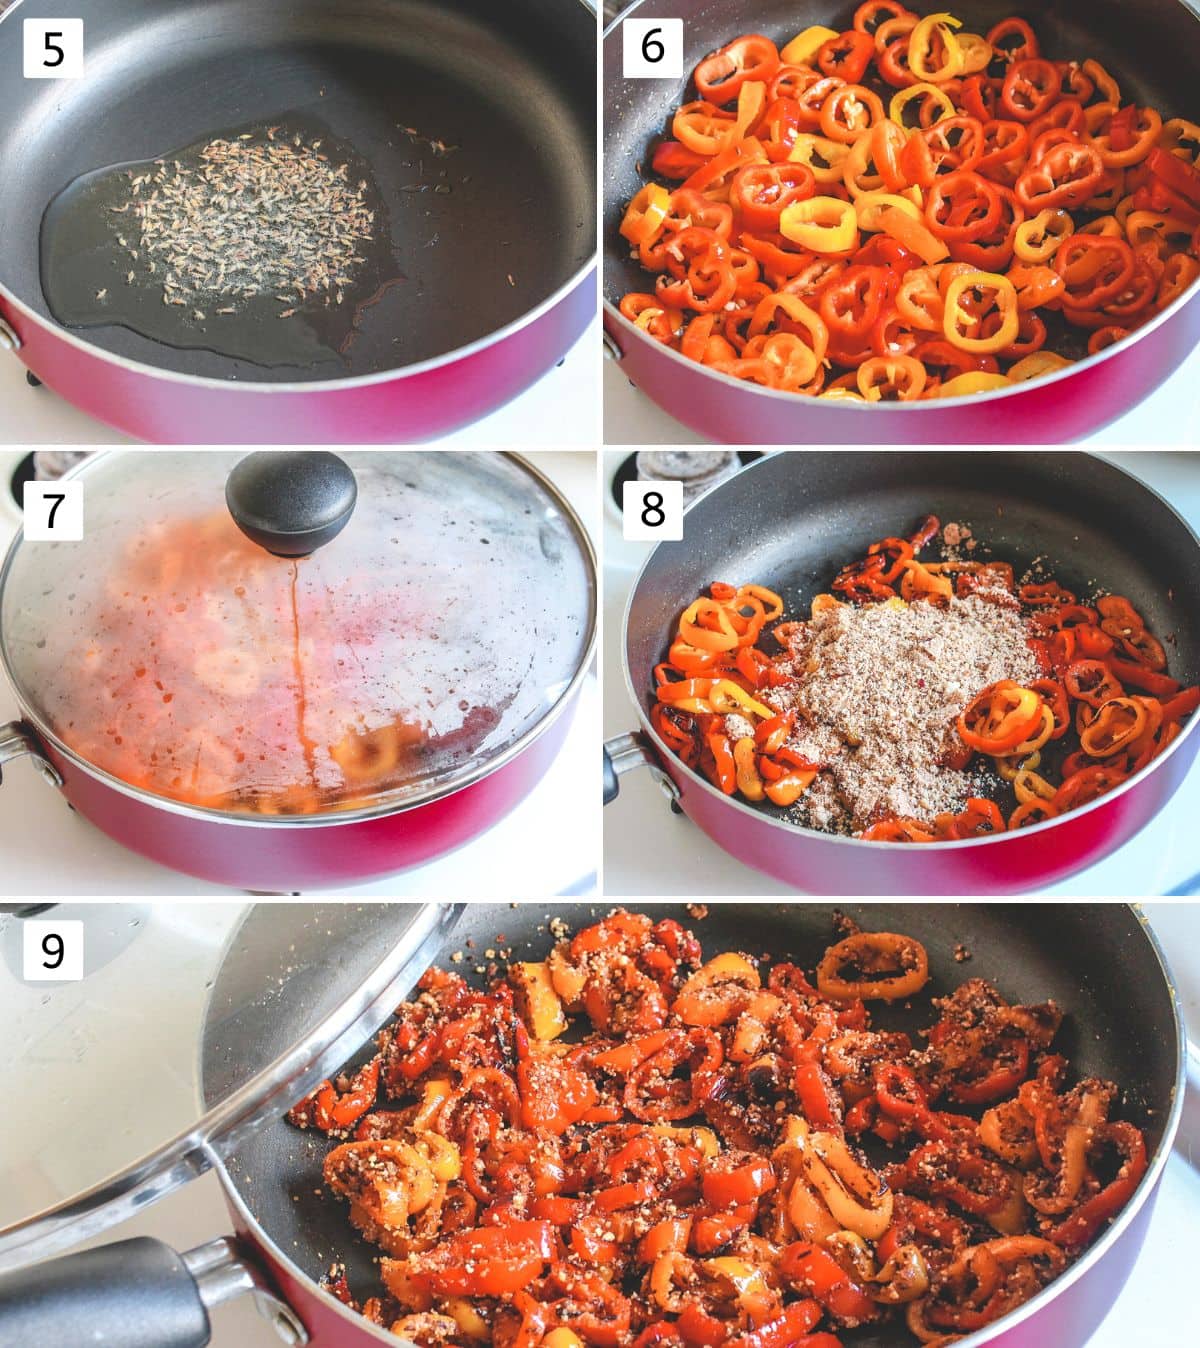 Collage of 5 images showing tempering spices, cooking peppers and mixing with prepared powder.